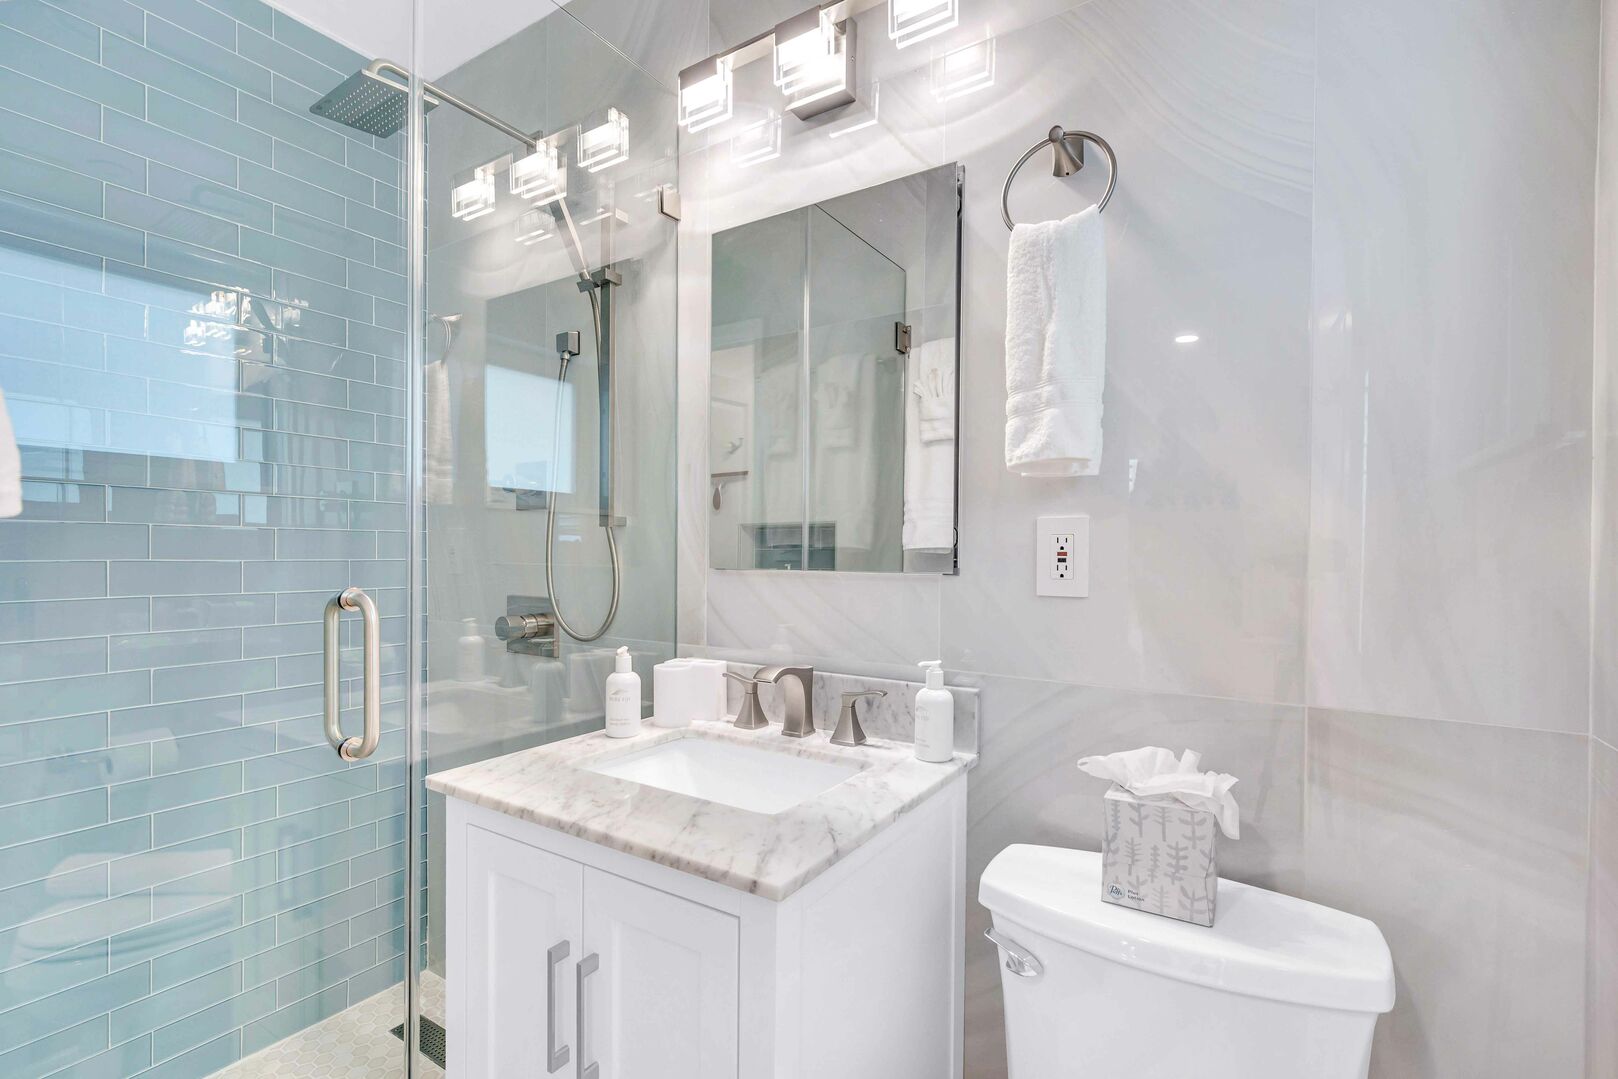 The Master bathroom features a walk-in shower.